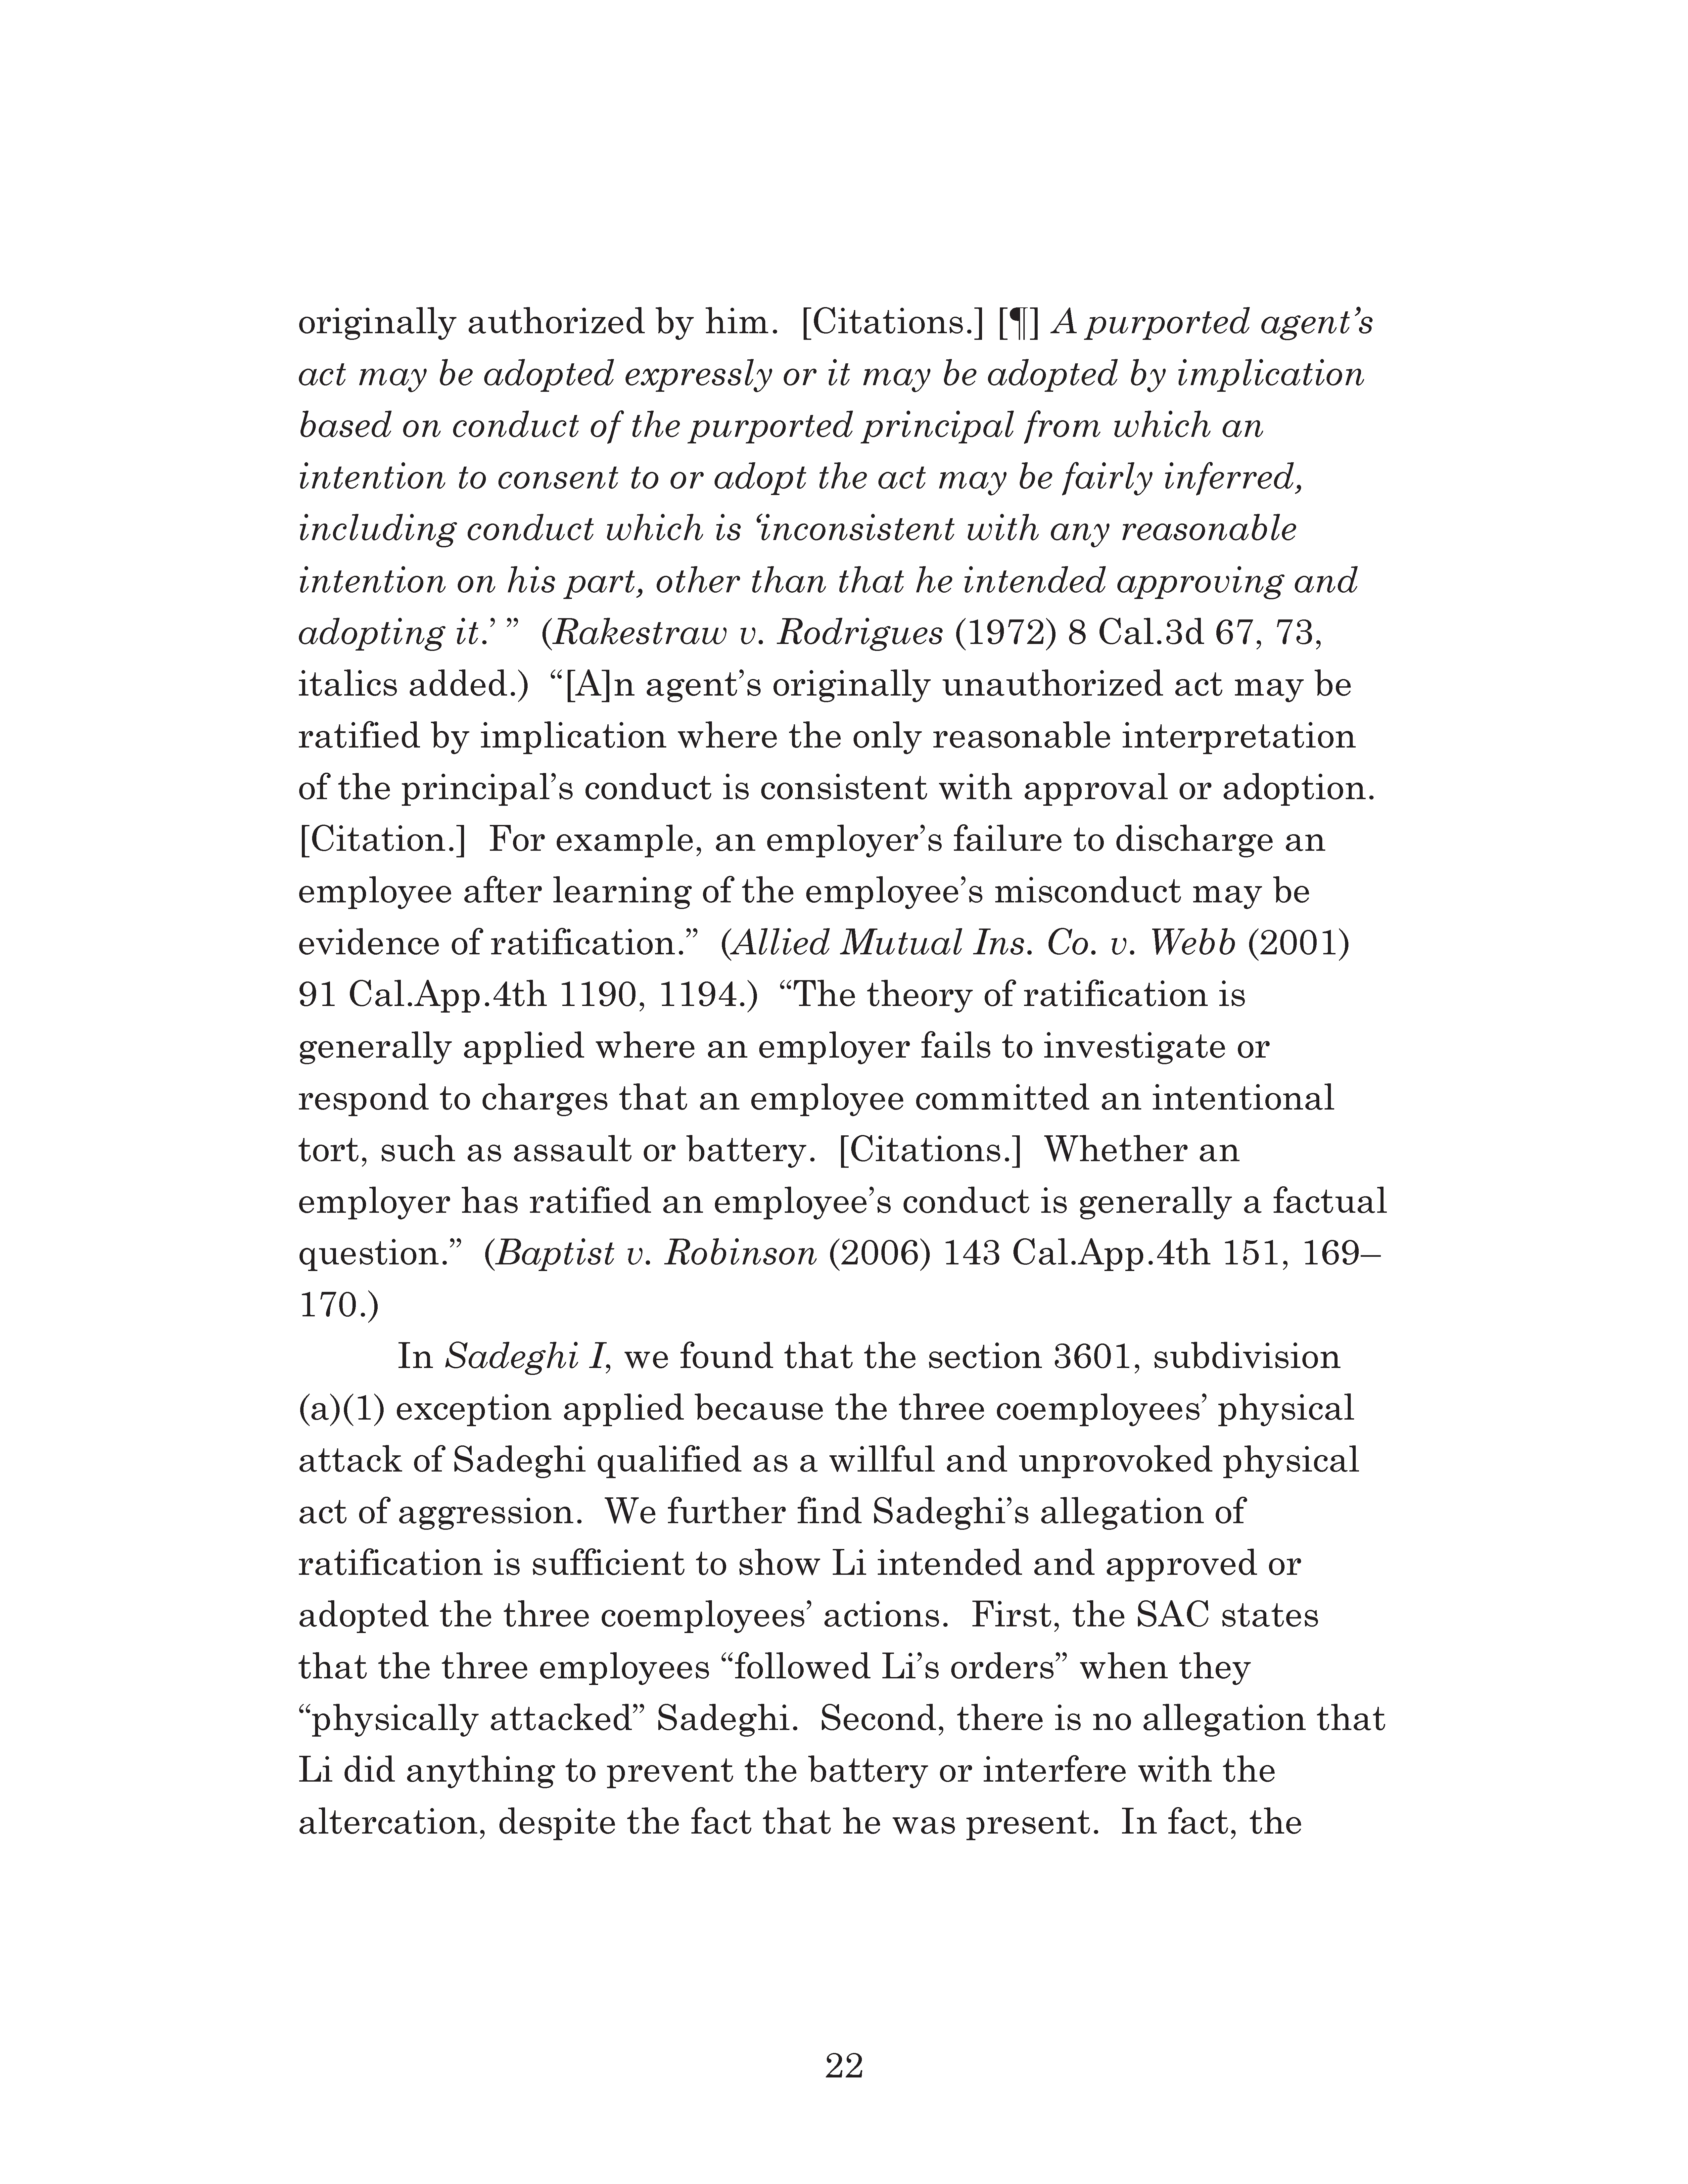 Appellate Court's Opinion Upholding Sadeghi's Claims for Fraud, Battery and IIED Against Li Page 22